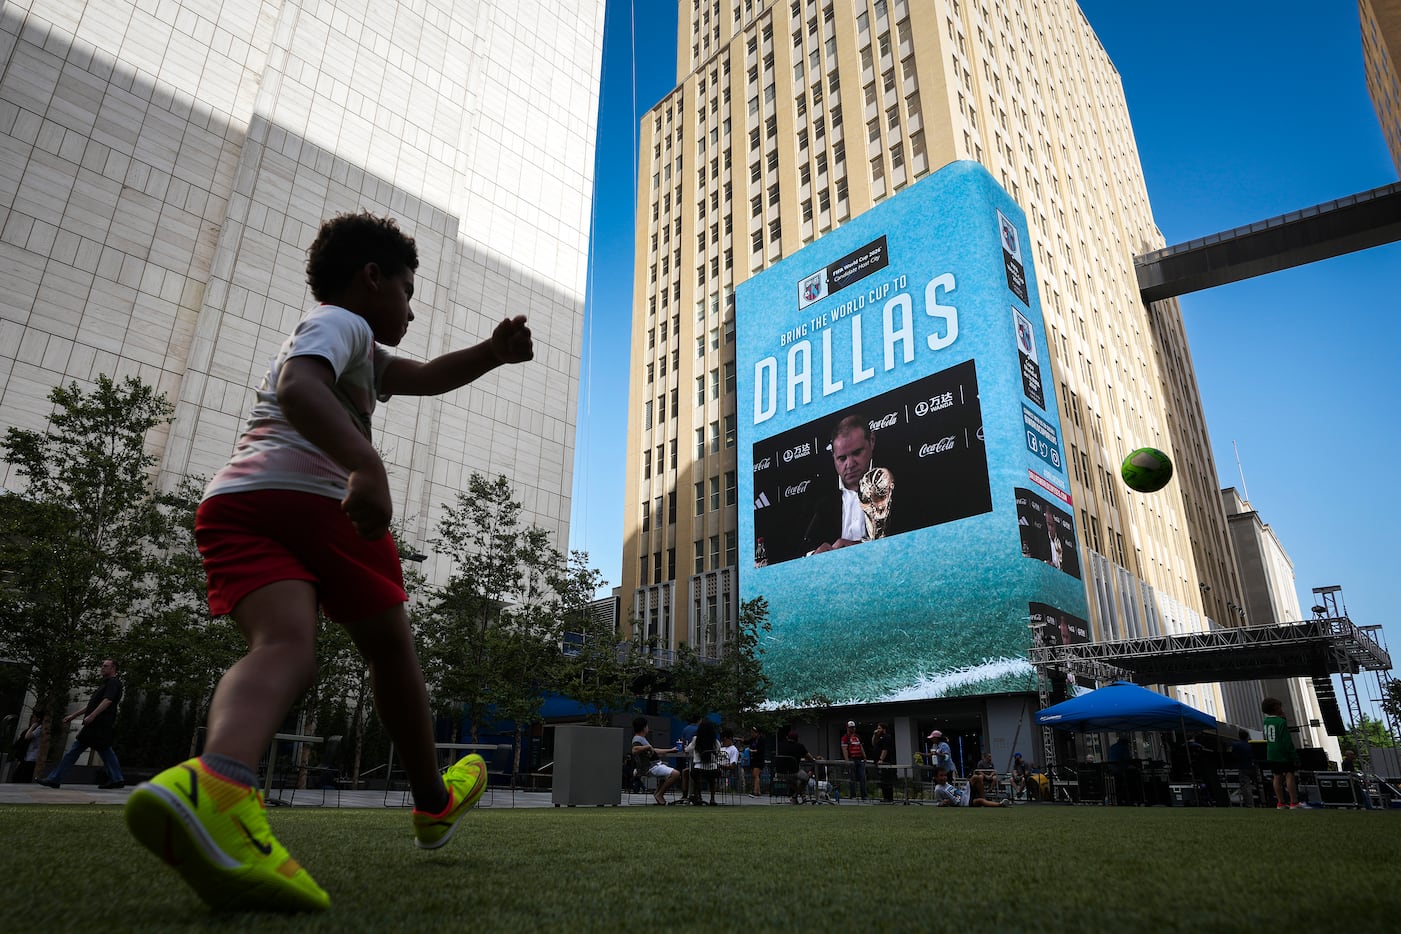 Dallas' FIFA World Cup 2026 Tech Roundtable Takes the Long View, With a  Smart City Focus » Dallas Innovates